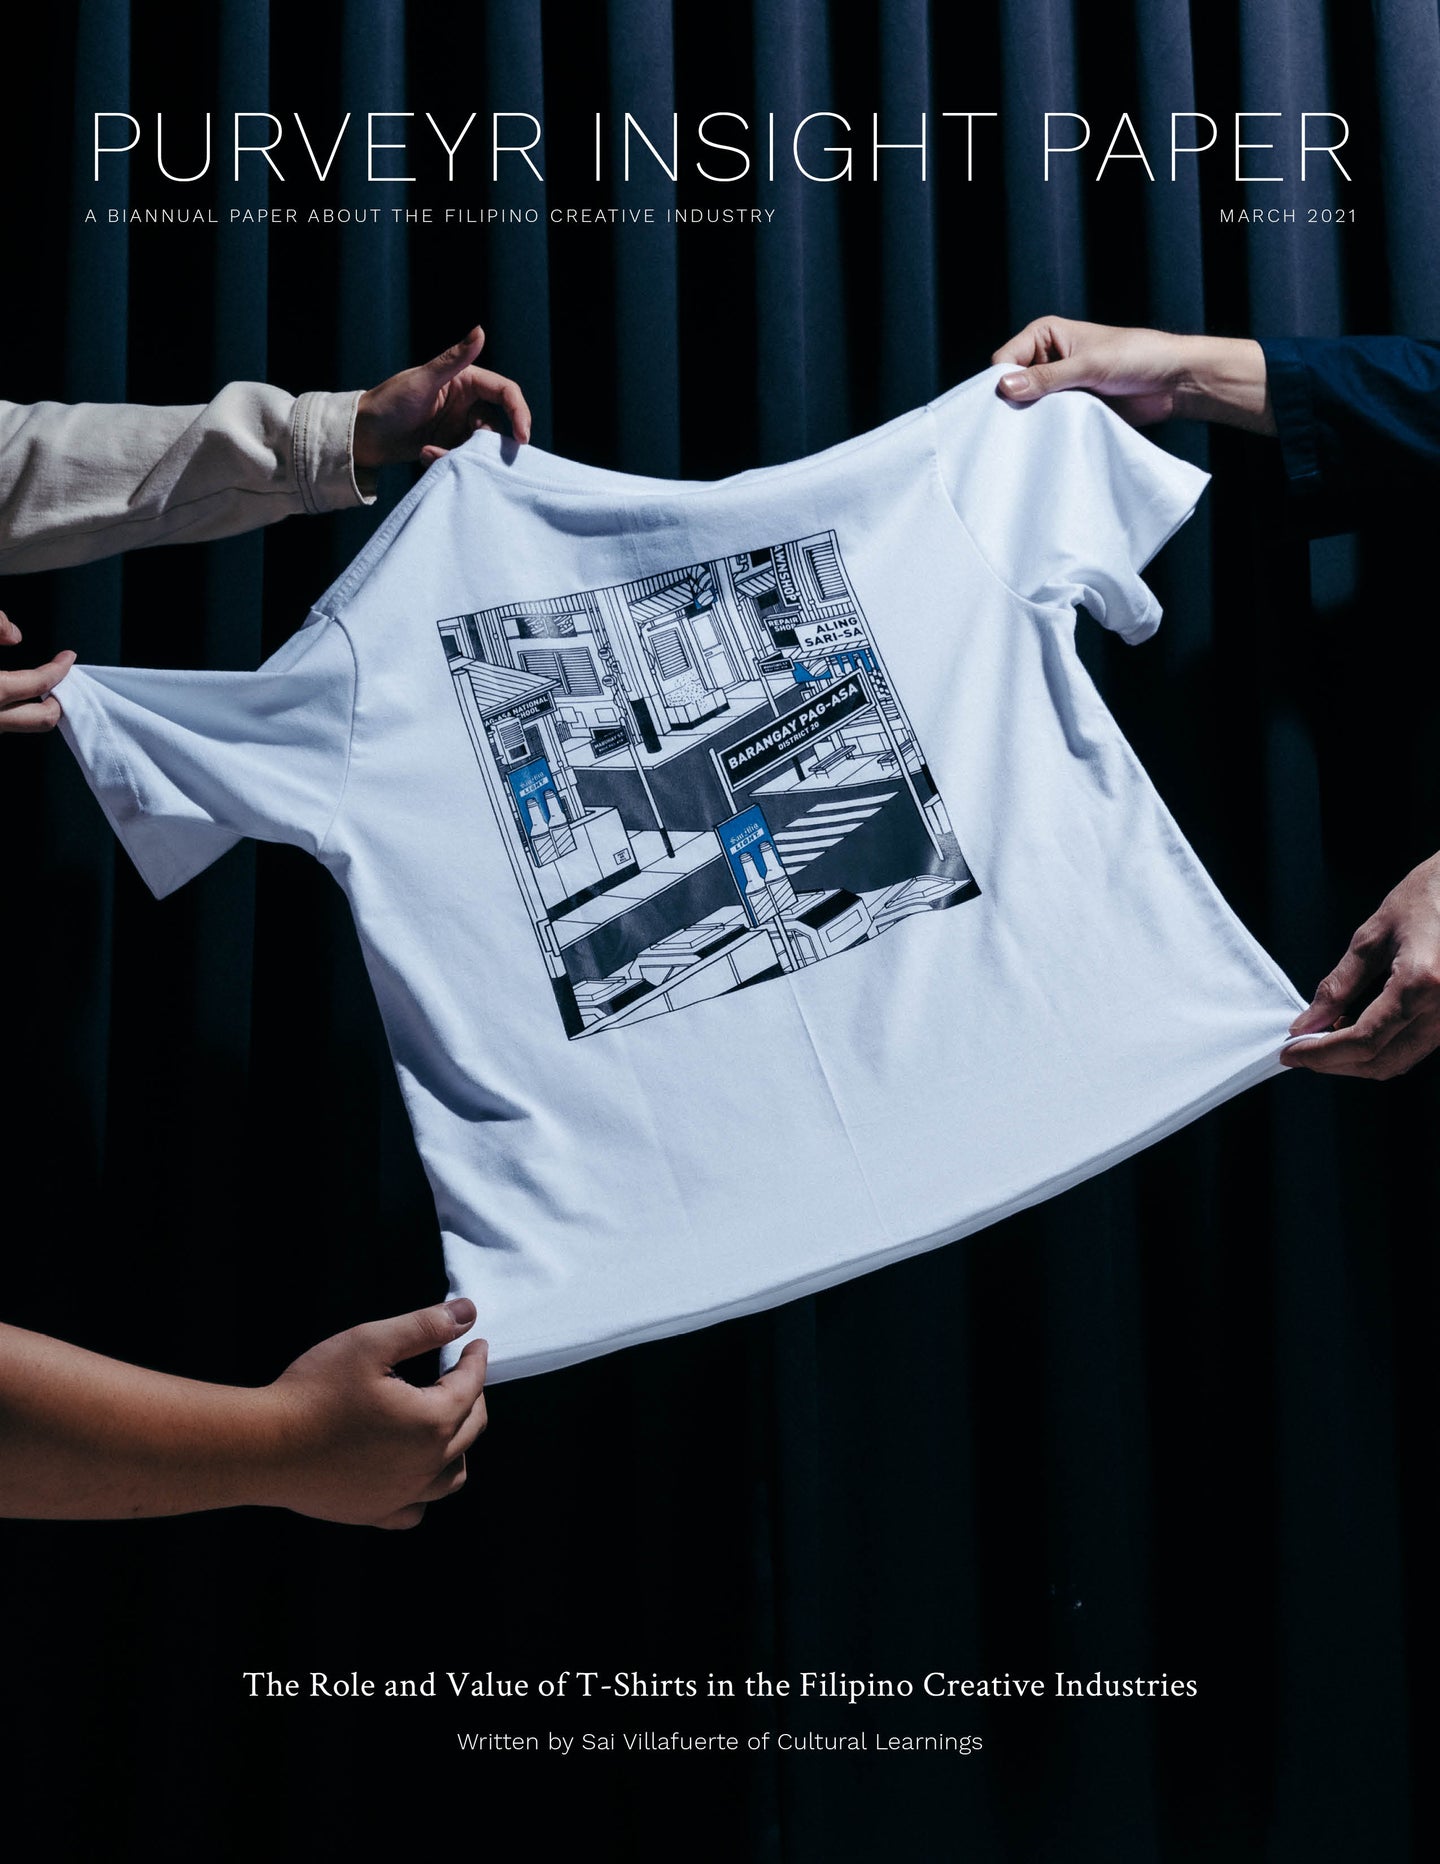 PURVEYR Insight Paper — The Role and Value of T-Shirts in the Filipino Creative Industries